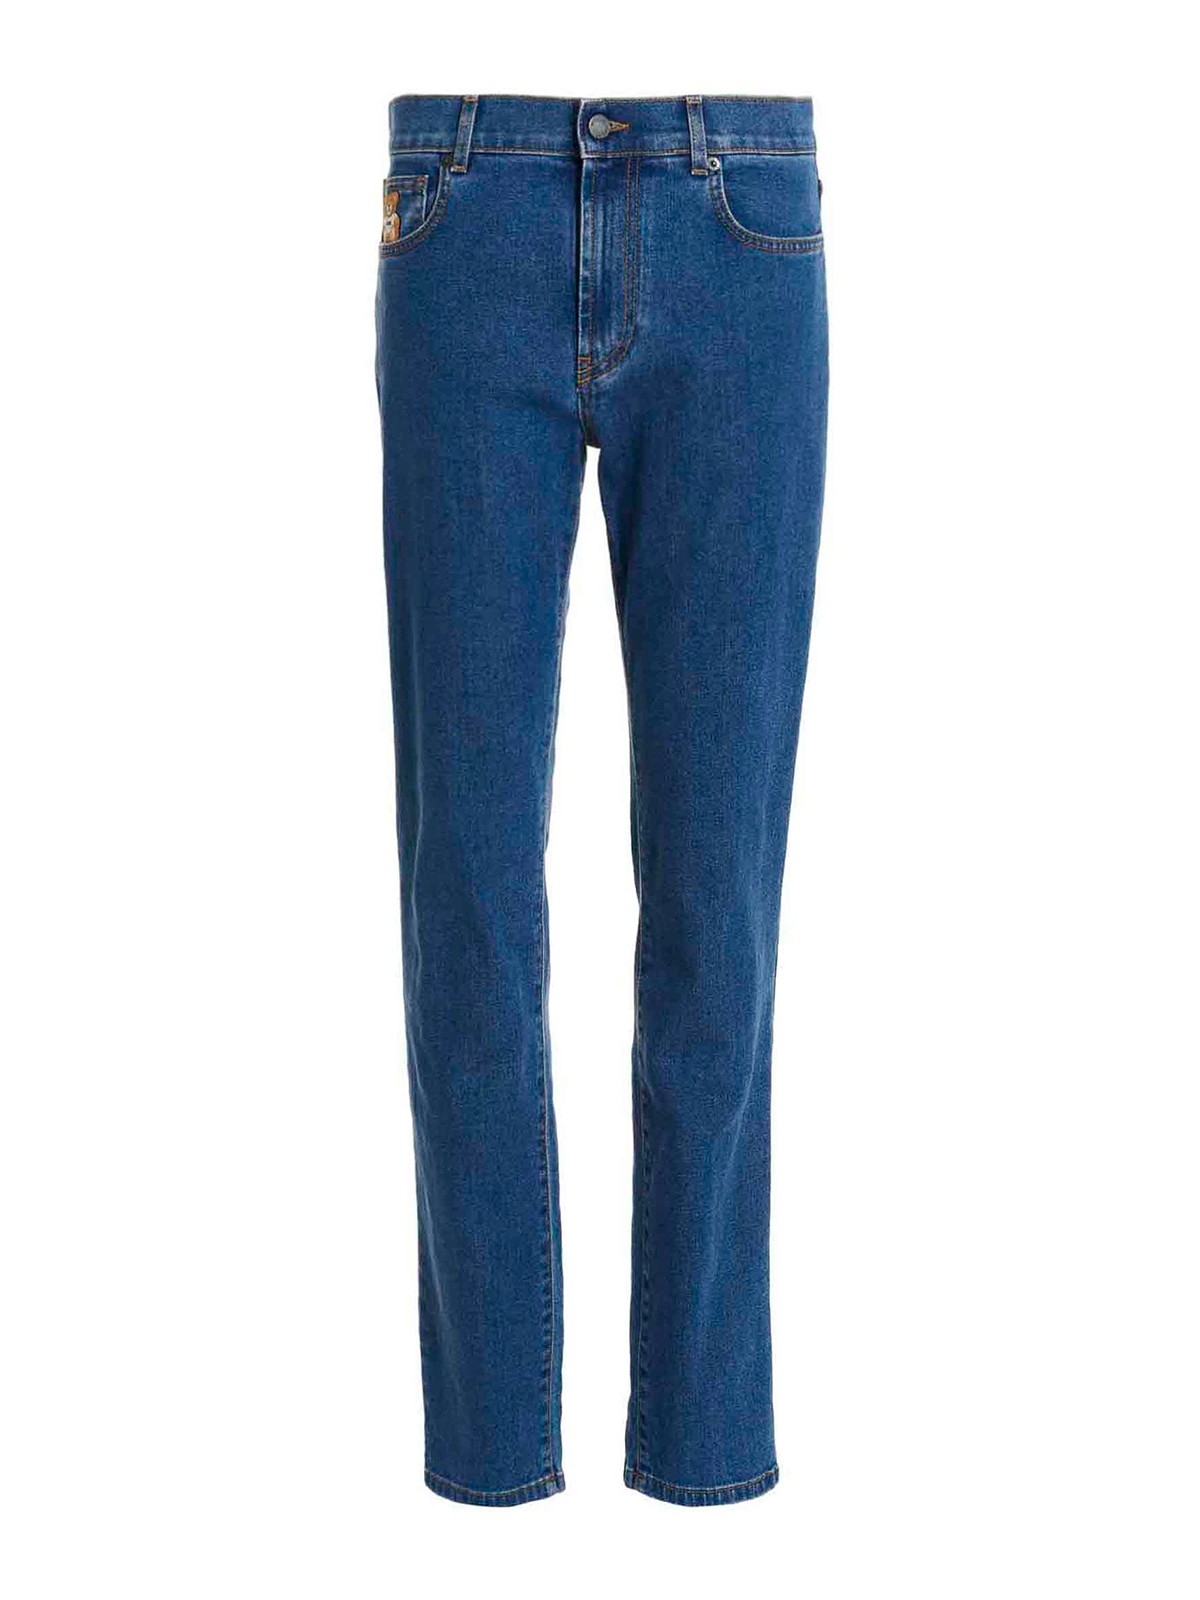 Moschino Denim Jeans With Teddy Logo Patch In Light Wash